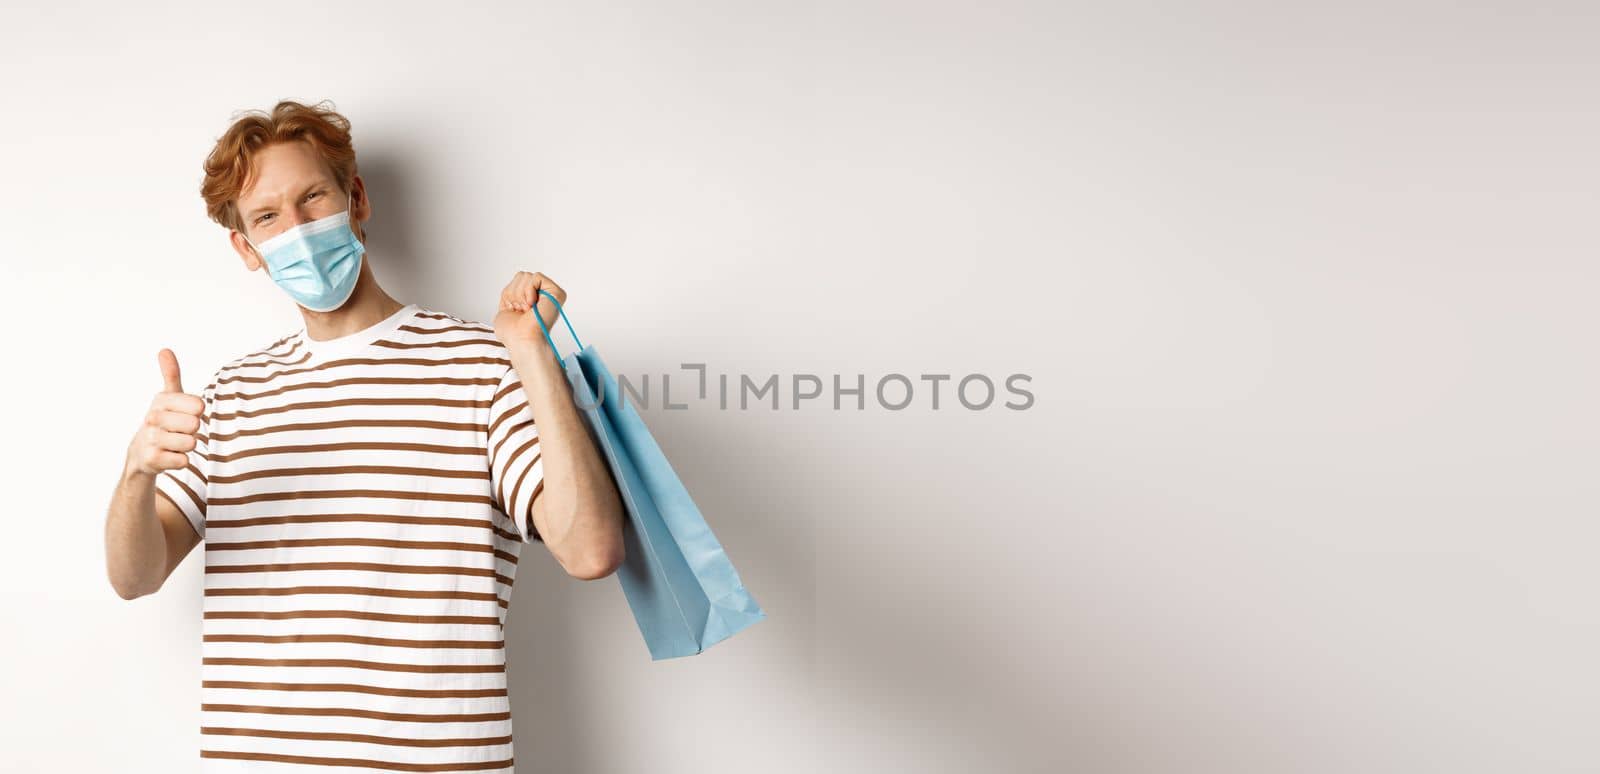 Concept of covid-19 and shopping. Satisfied young man looking pleased after shopping, wearing face mask, showing thumbs-up, recommend store, white background.